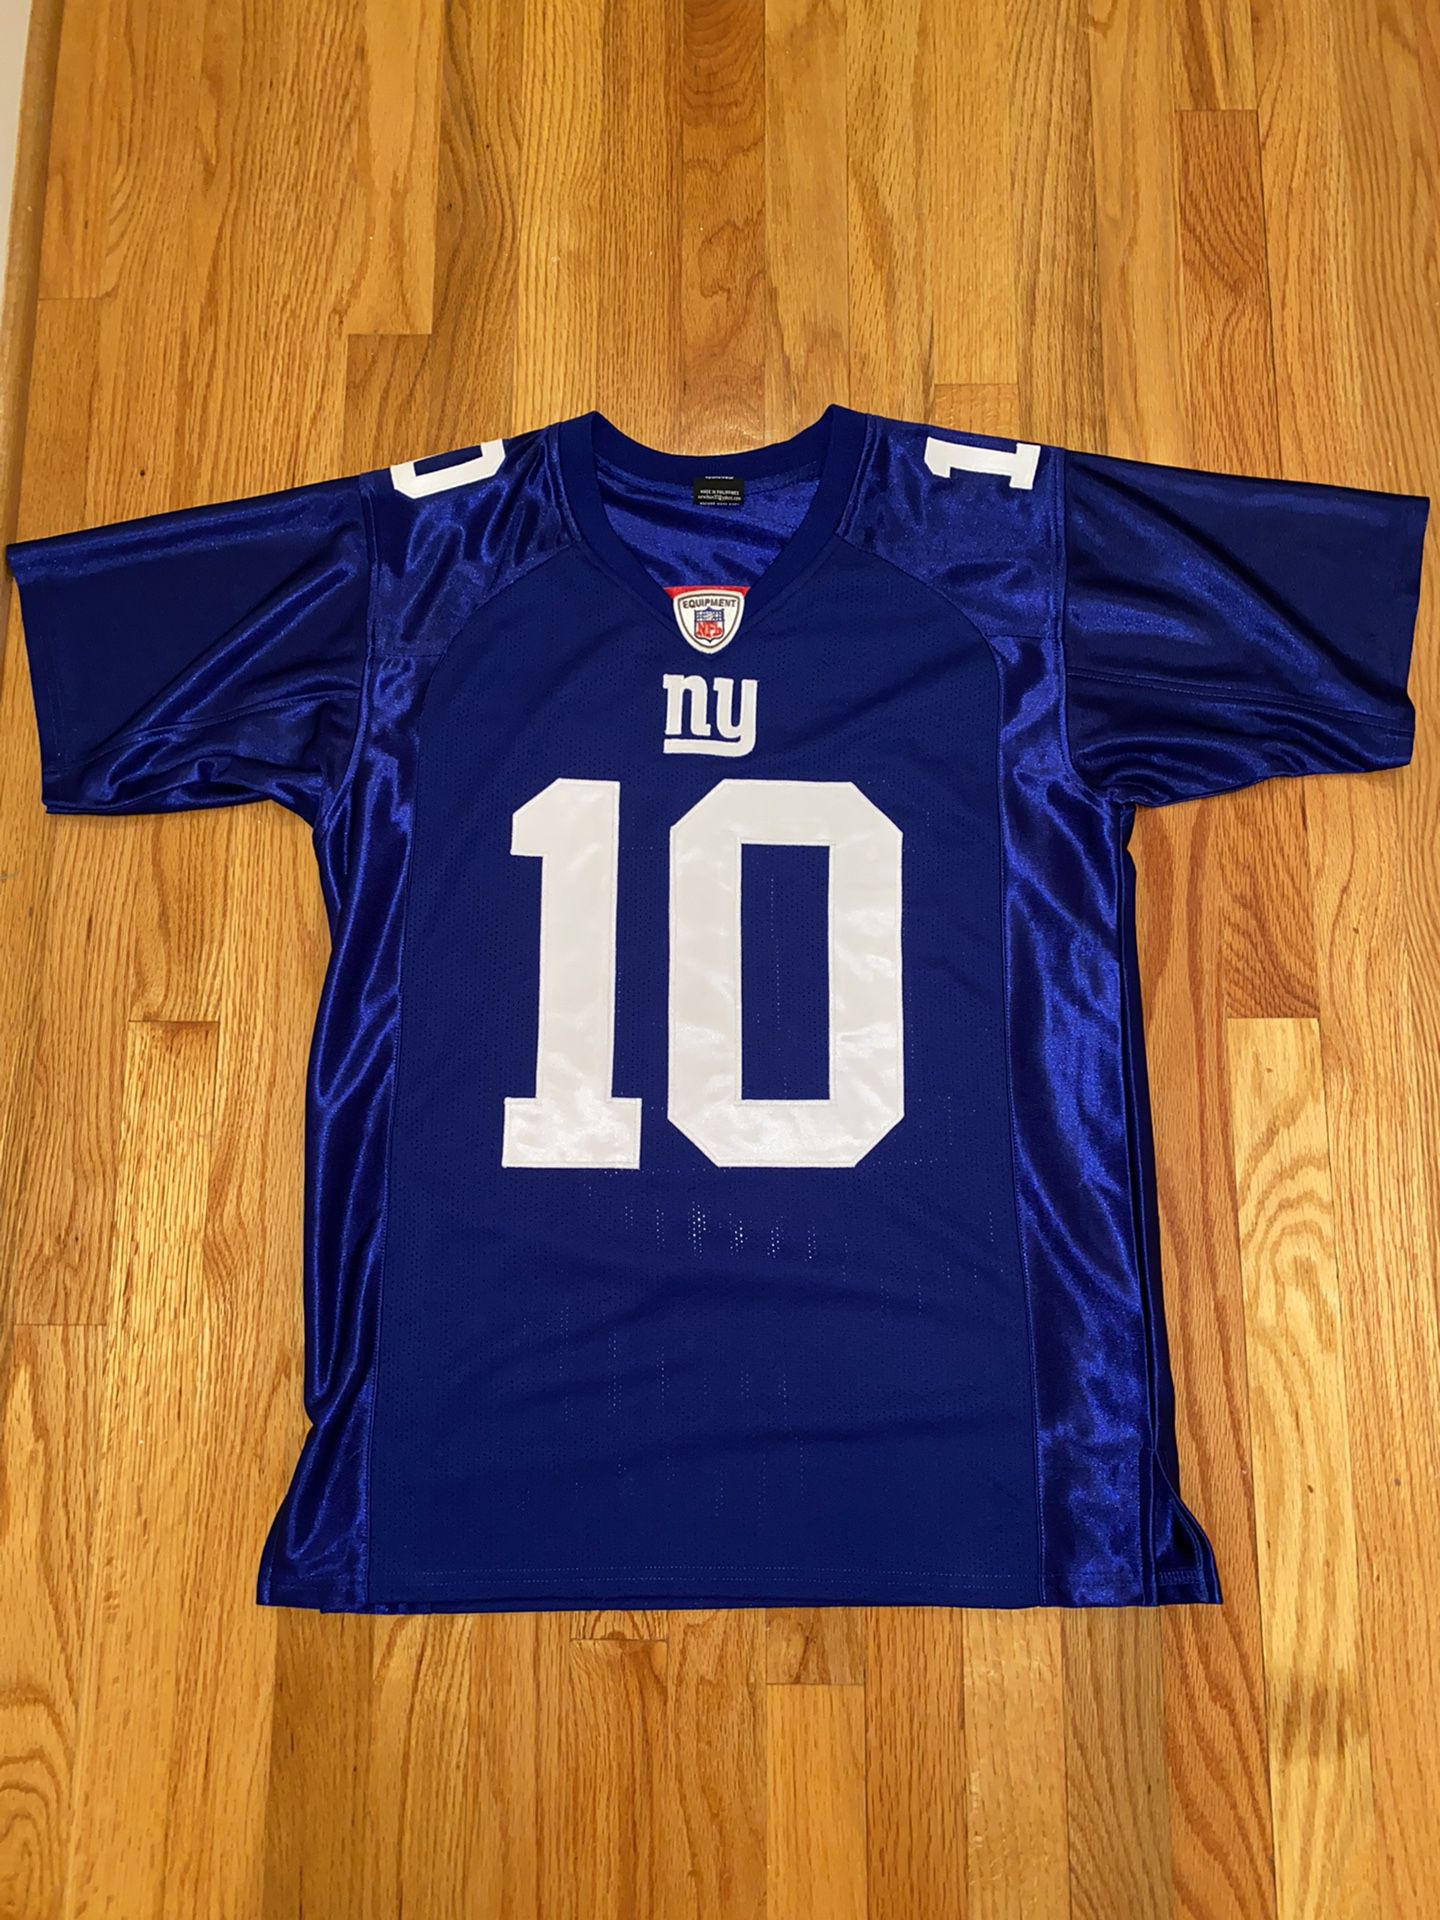 NY Giants-Authentic Jersey-Mens L